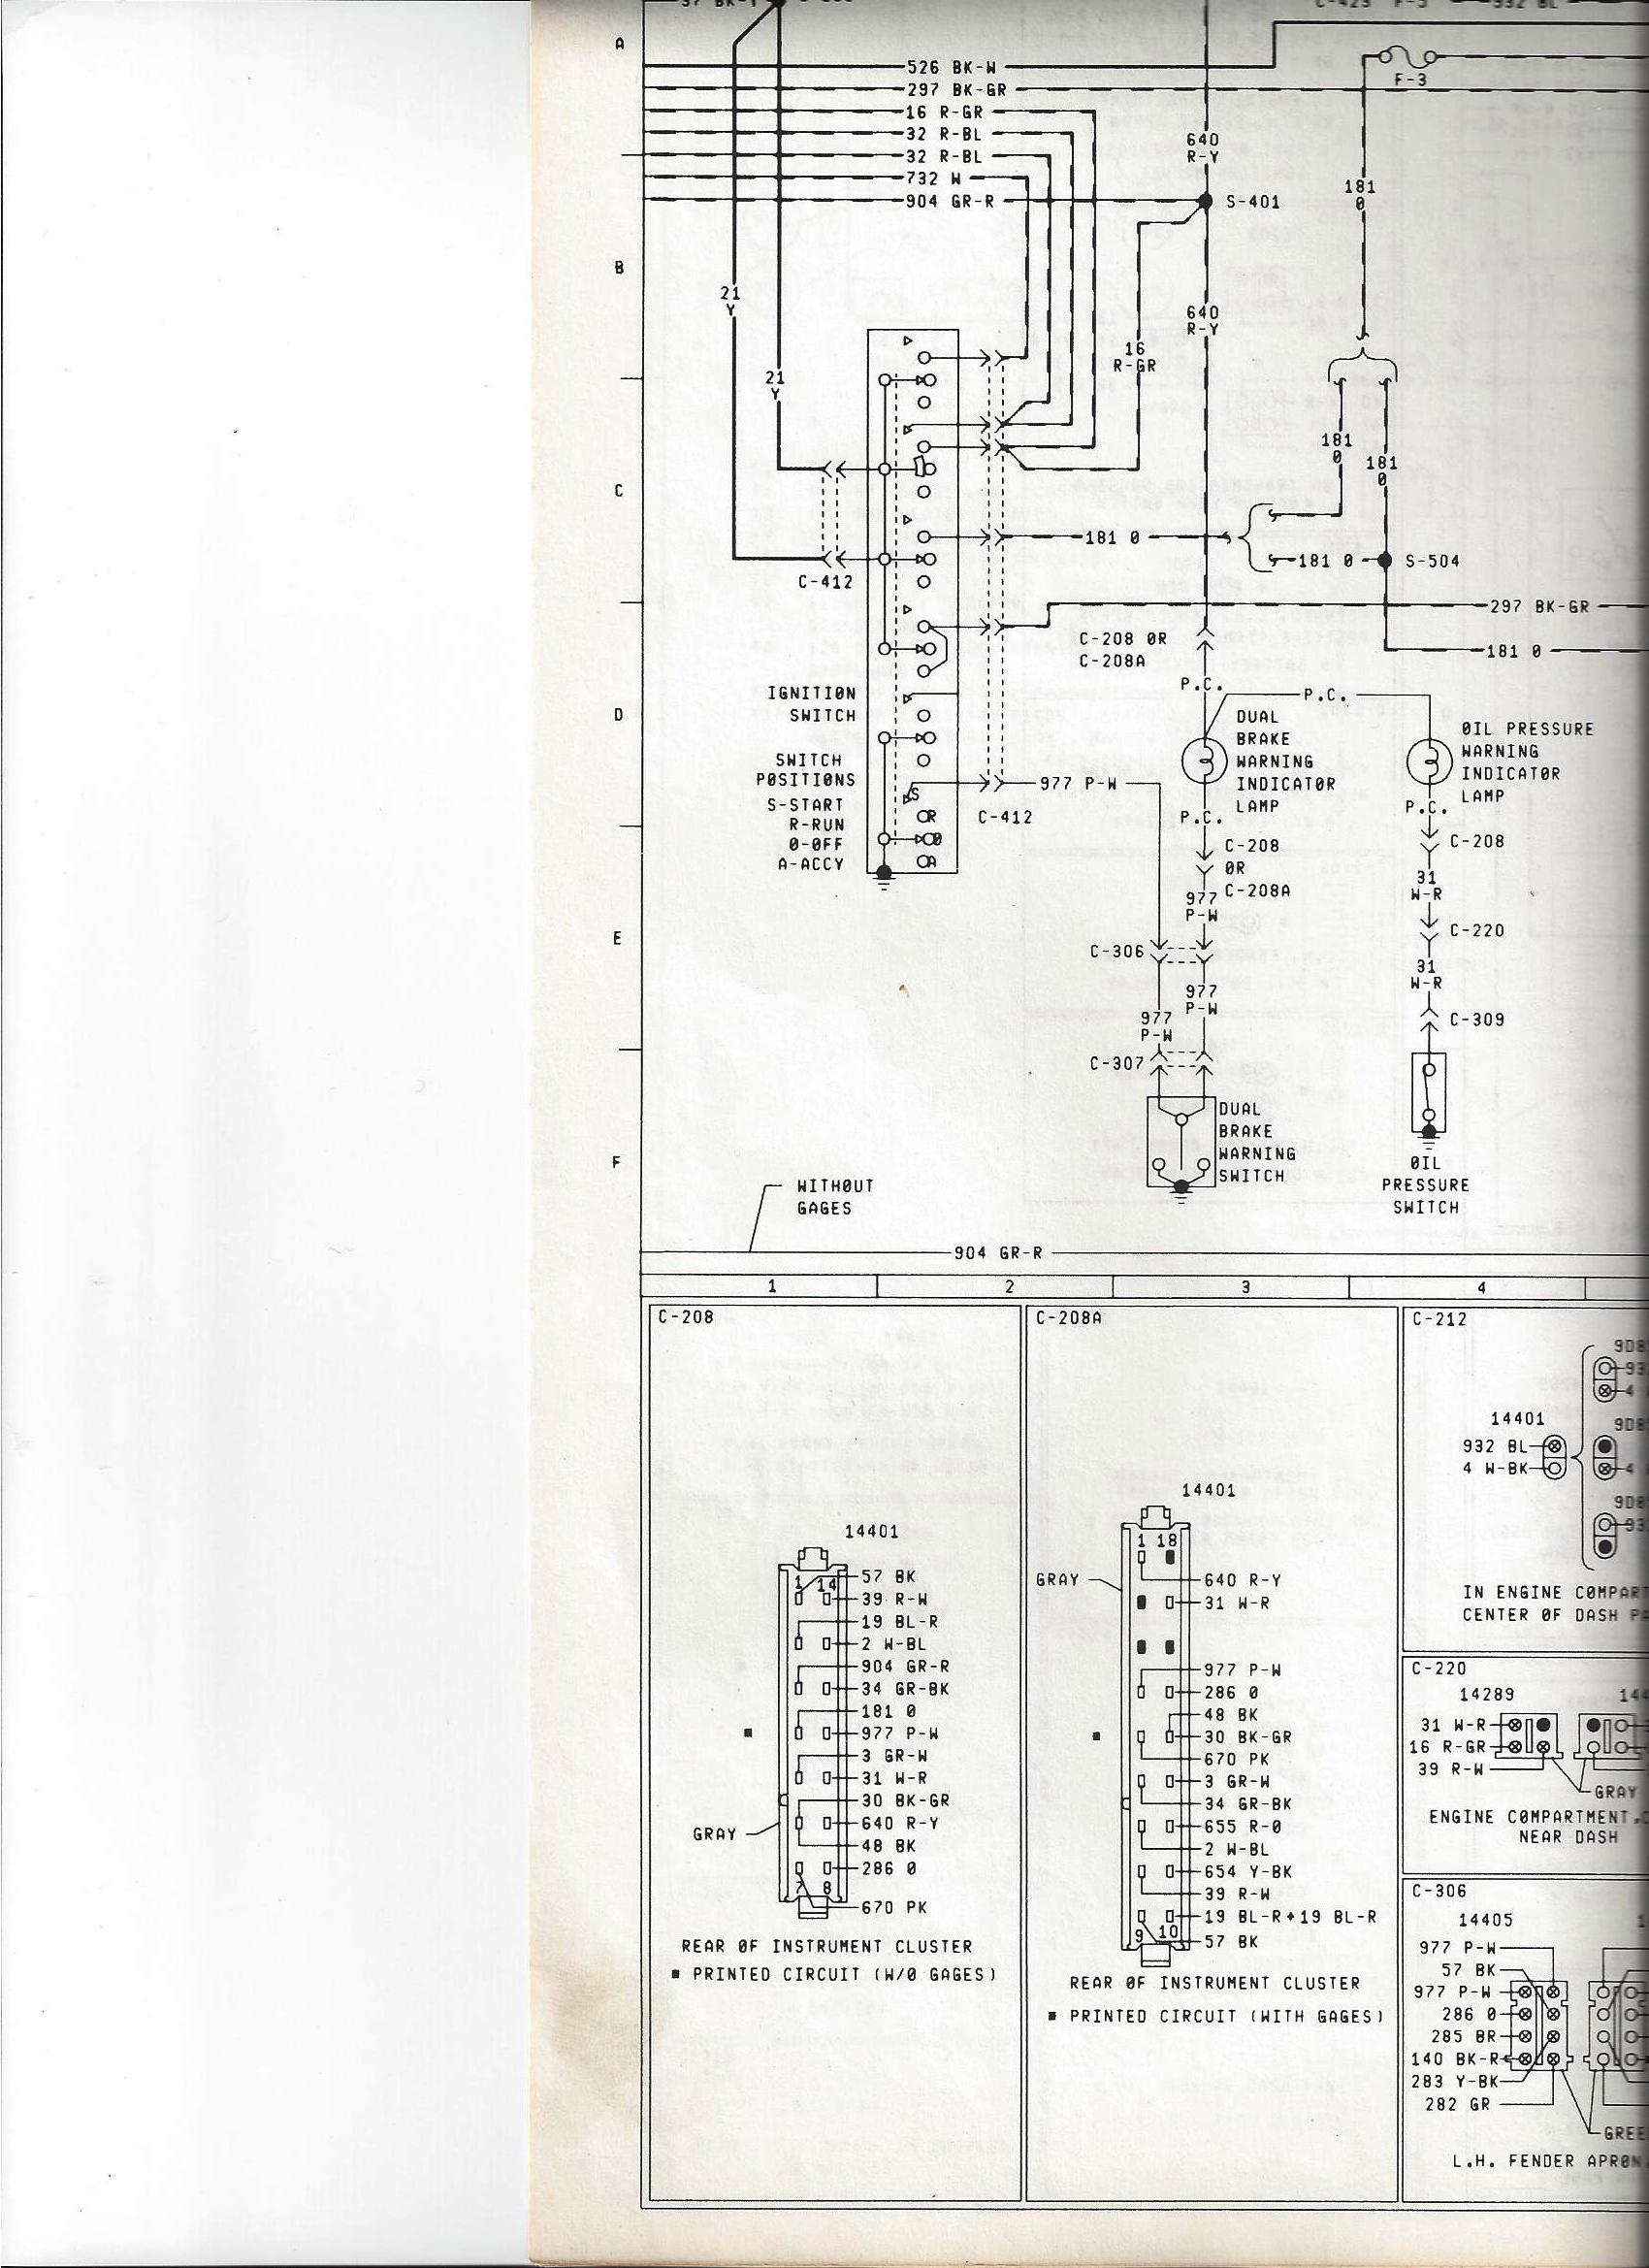 78-79 Bronco wiring code numbers and colors wiring | Bronco Forum - Full  Size Ford Bronco Forum  1979 Ford F150 Instrument Cluster Wiring Diagram    Full Size Bronco Forum